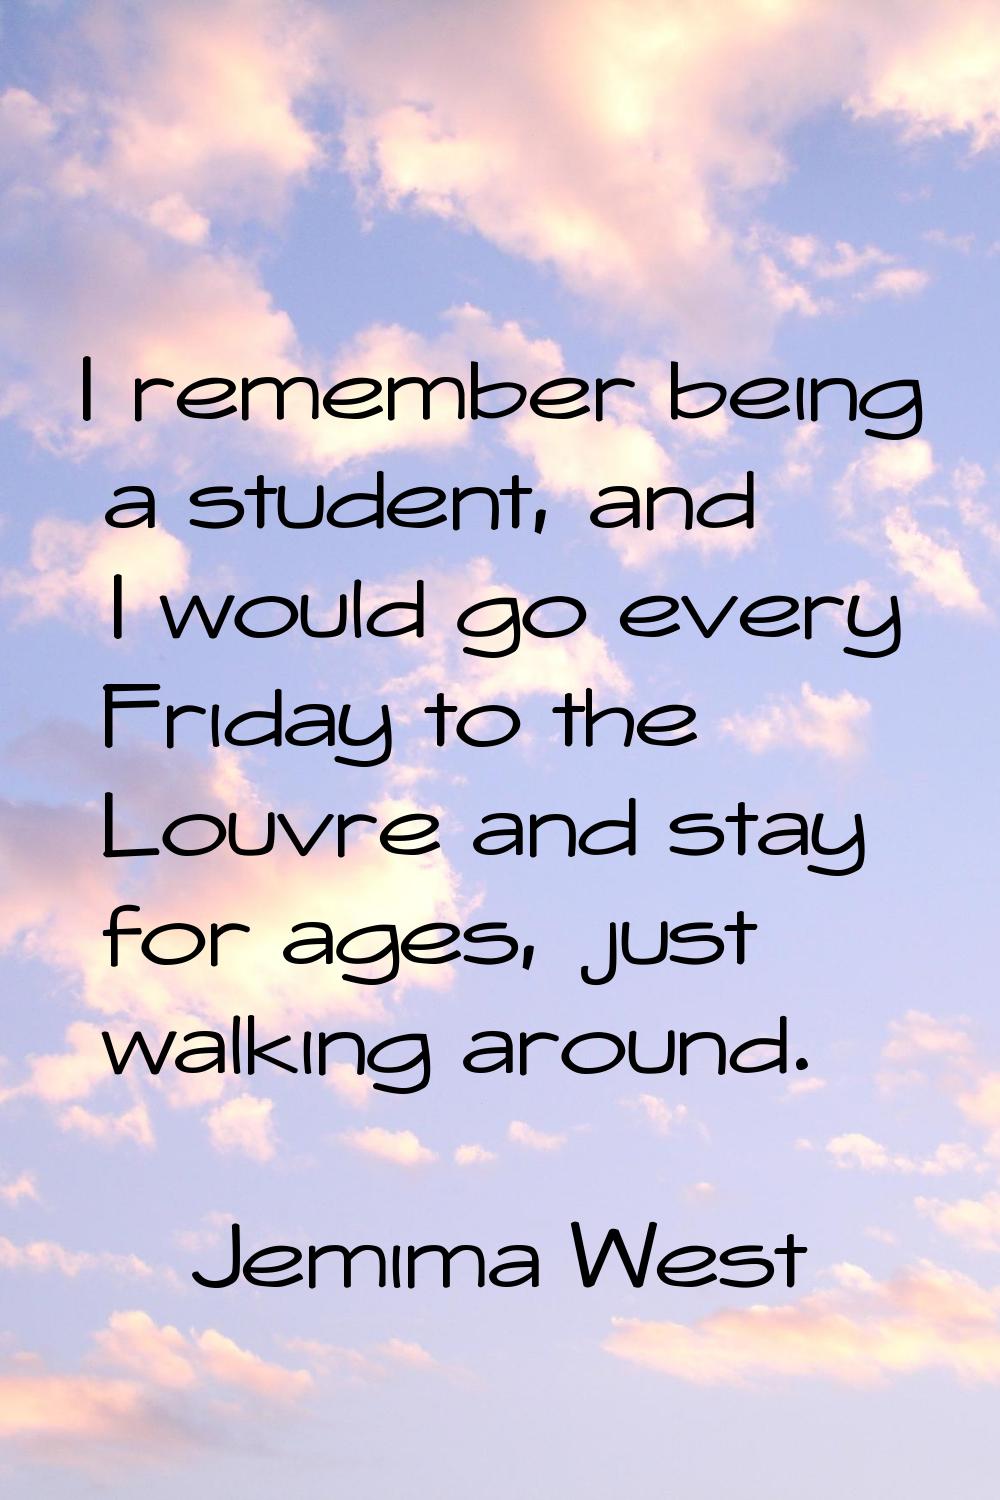 I remember being a student, and I would go every Friday to the Louvre and stay for ages, just walki